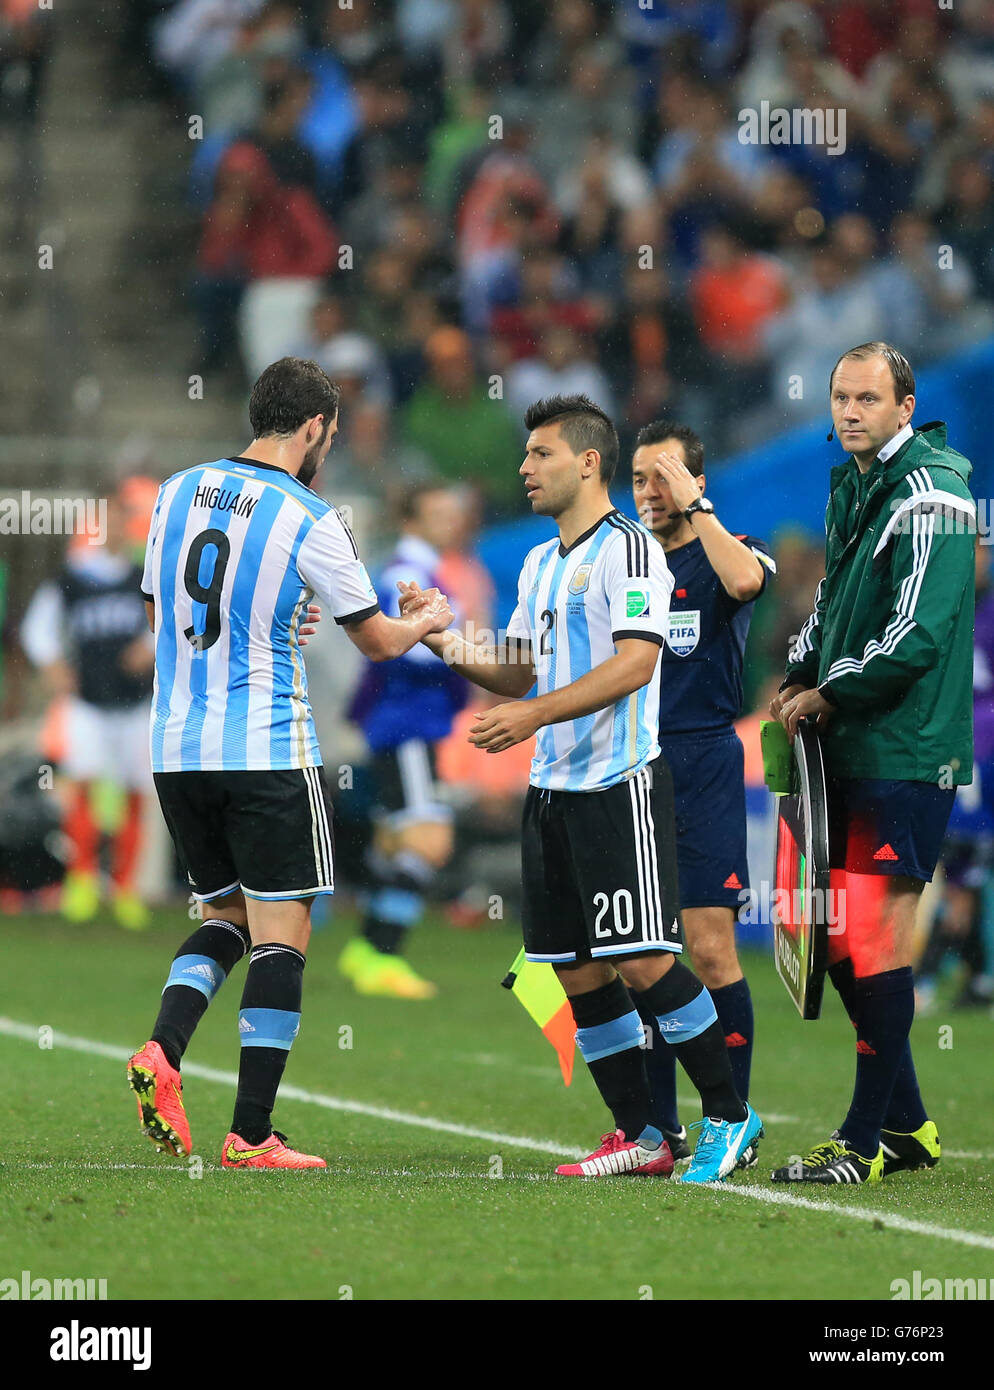 Soccer - FIFA World Cup 2014 - Semi Final - Netherlands v Argentina - Arena de Sao Paulo. Argentina's Gonzalo Higuain is substituted for Argentina's Sergio Aguero (right) Stock Photo